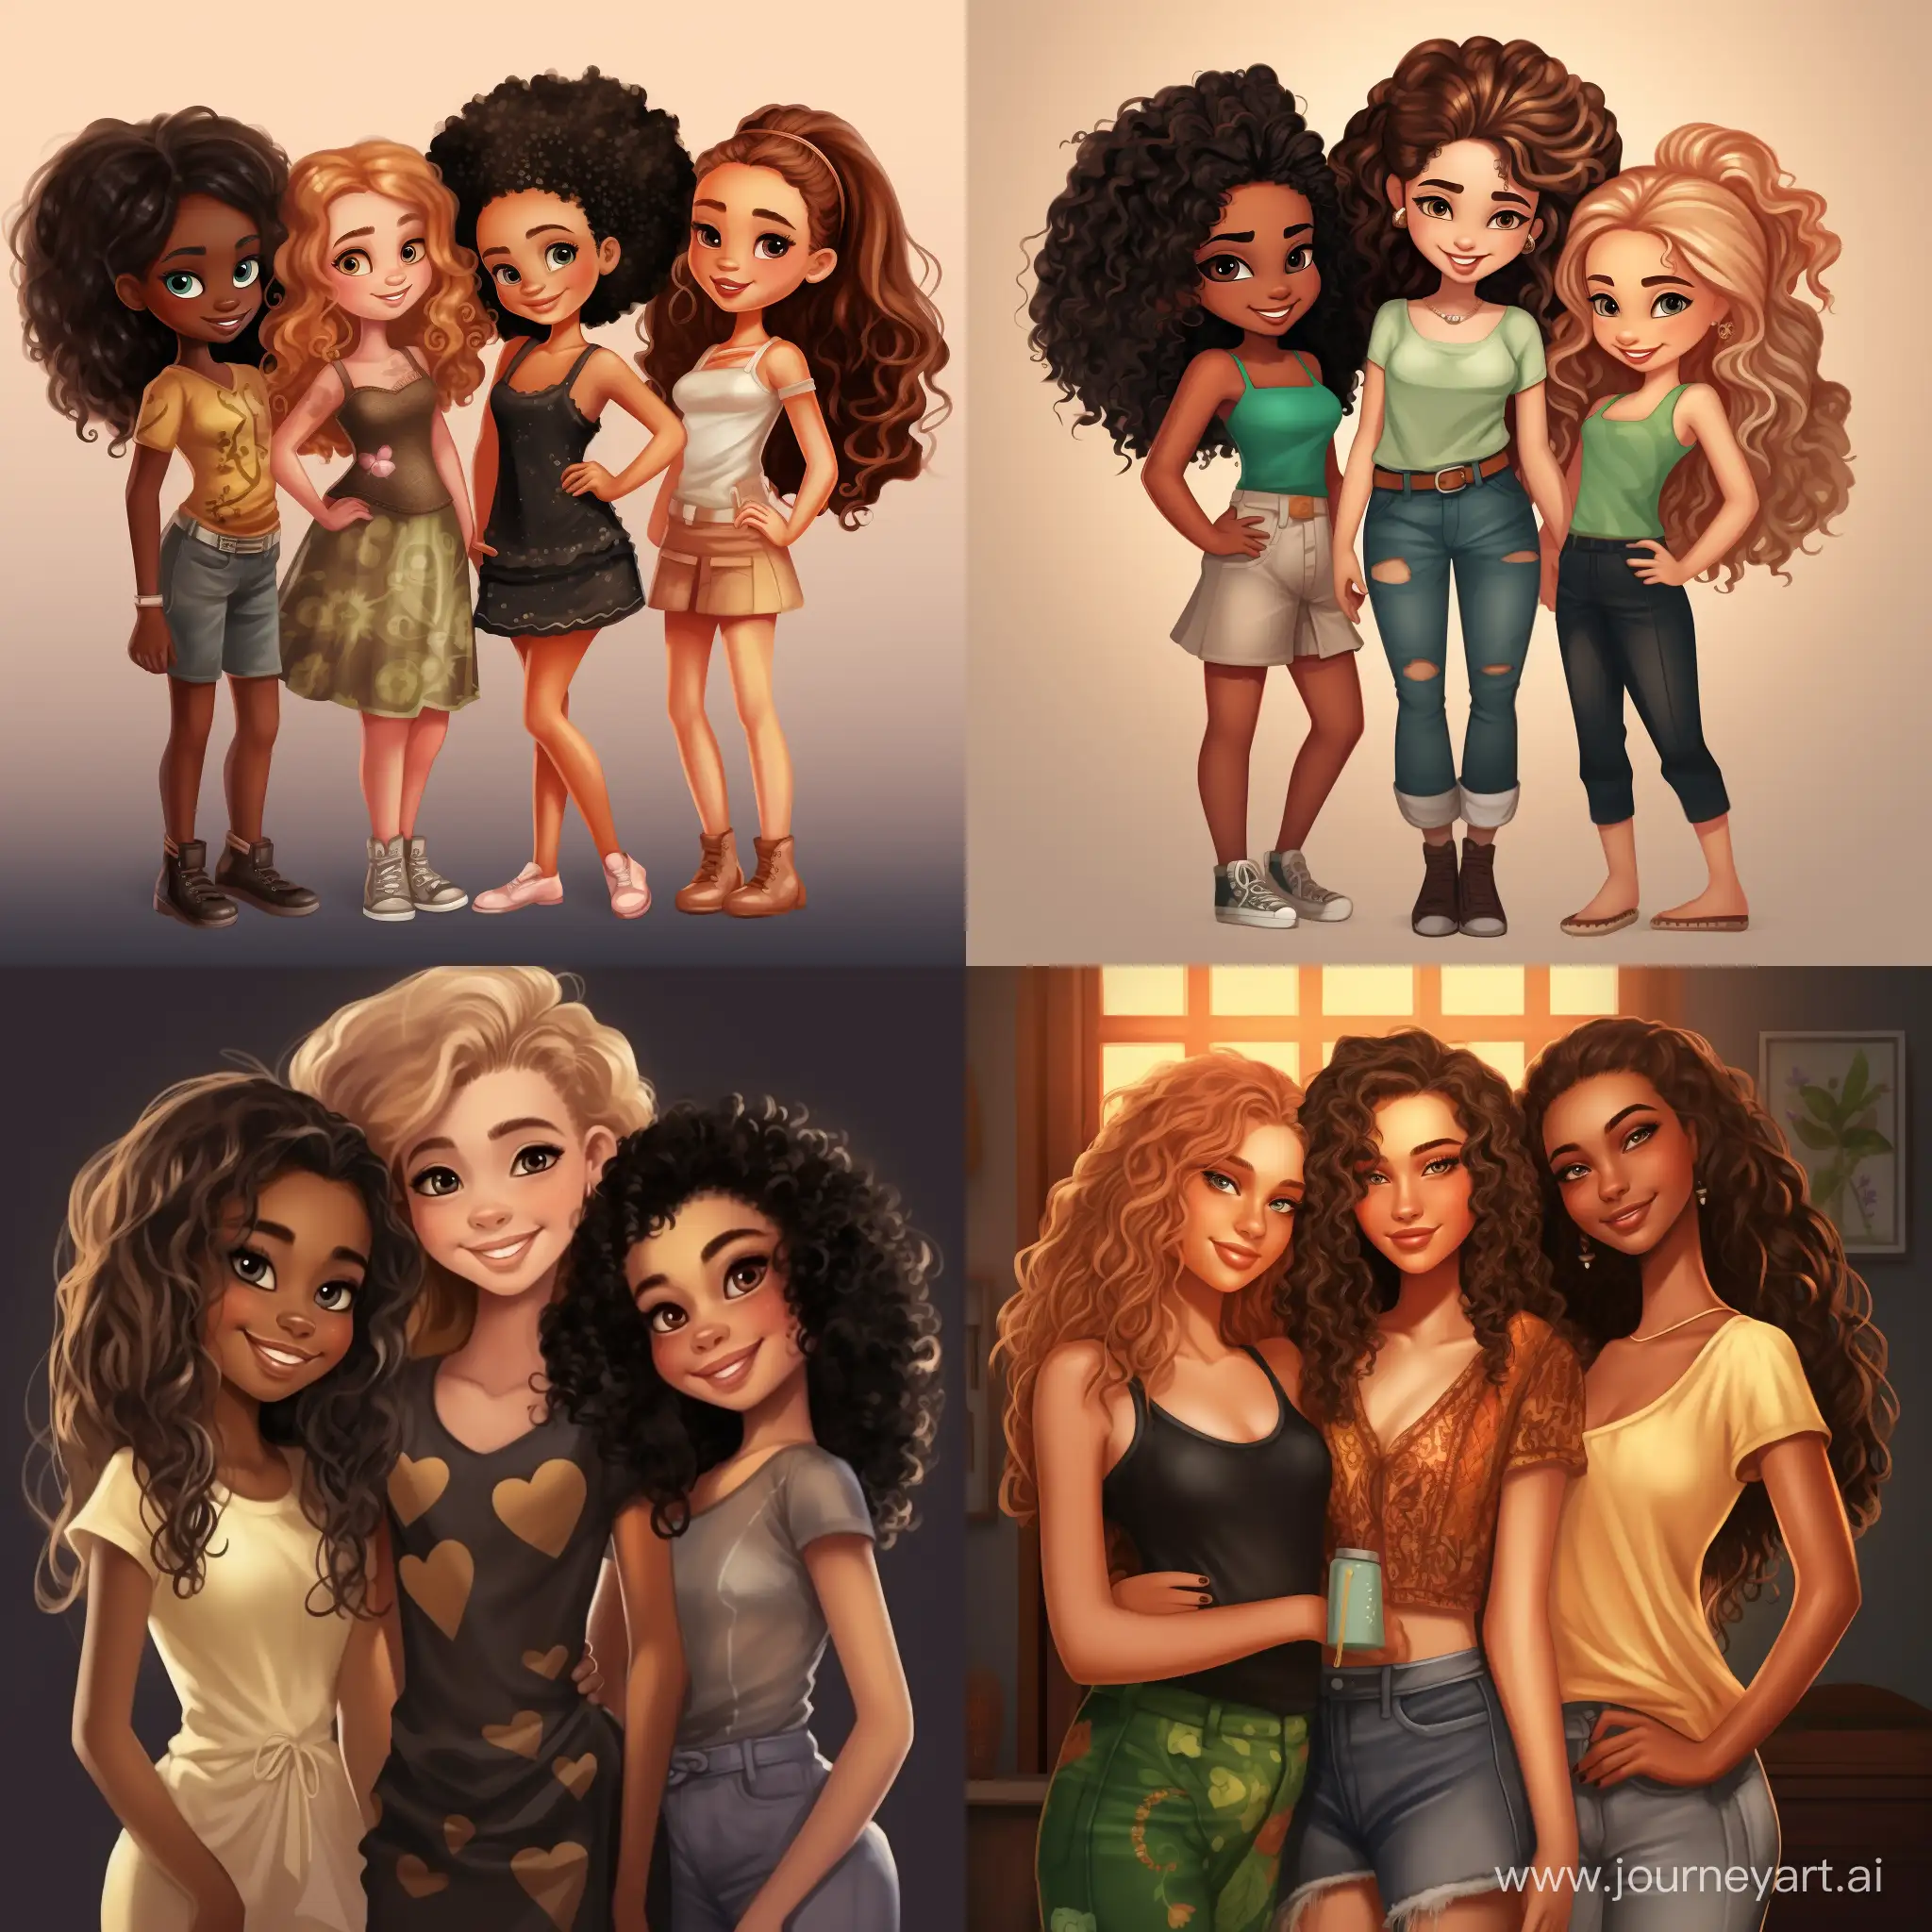 4 girls, best friends, beautiful girl with straight dark hair and expressive green eyes, strict brunette, smiling curly blonde, cute dark-skinned girl of small stature, high quality, high detail, cartoon art